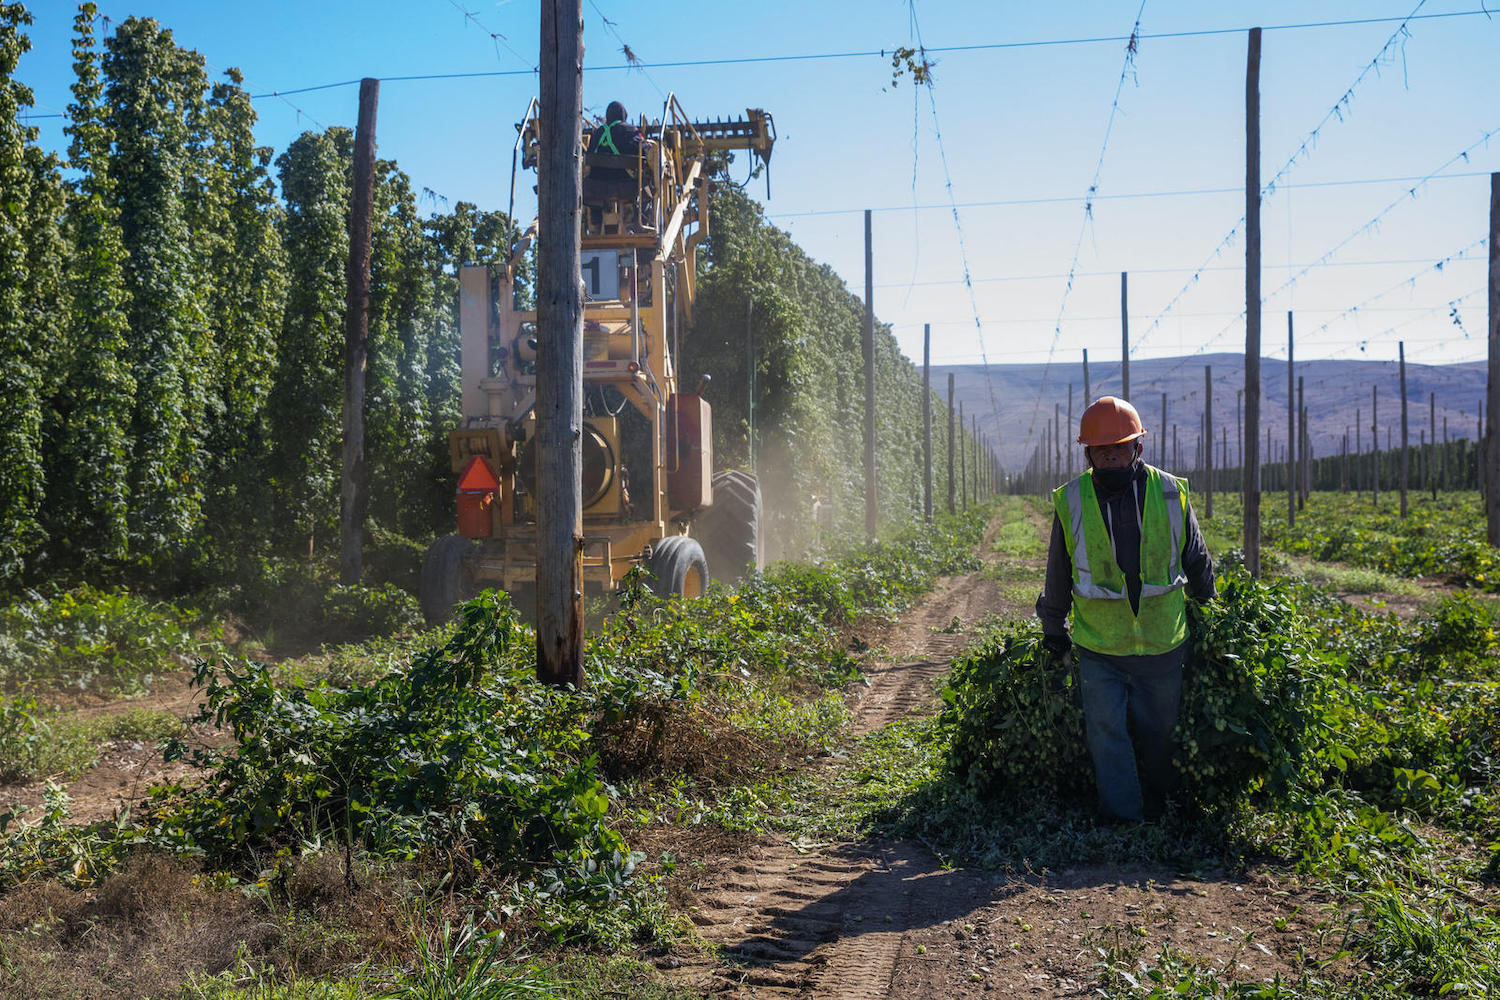 Antonio Dominguez harvests hops at Perrault Farms in Toppenish in Yakima County on Sept. 16, 2021. Dominguez has been with the farms for over 15 years. November 2021